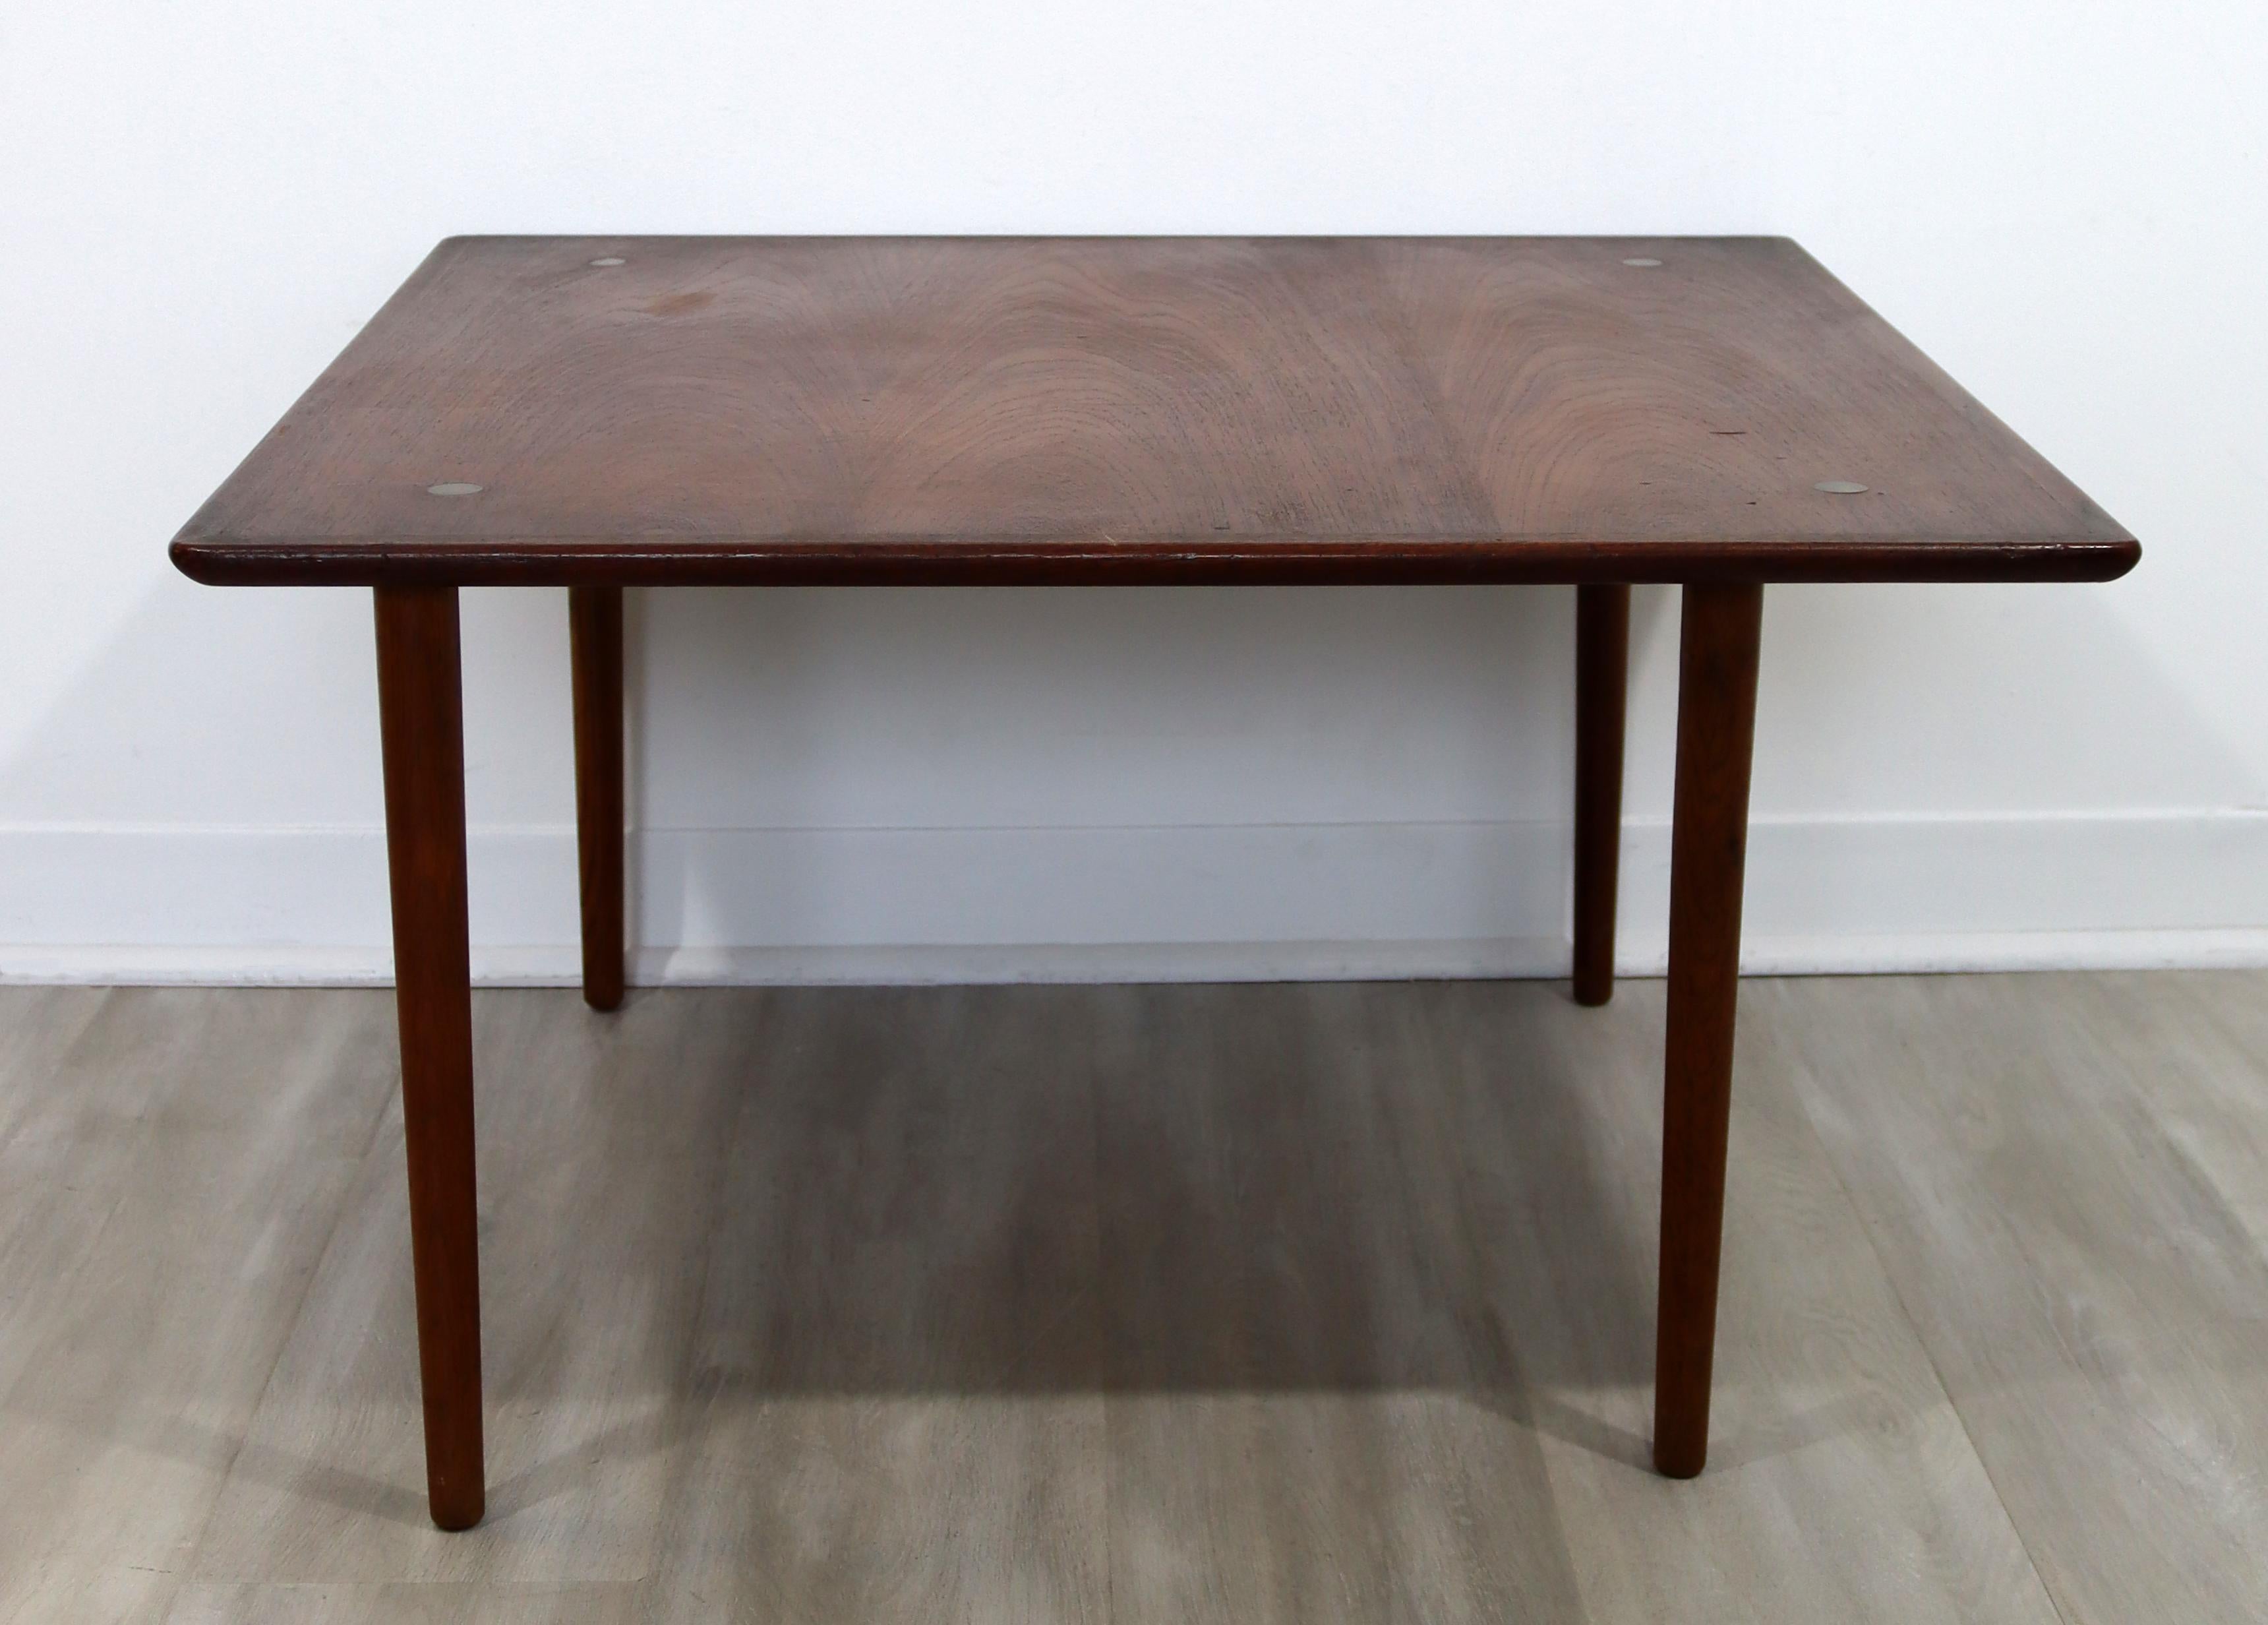 For your consideration is a terrific, square, teak side or end table, made in Denmark, by Hagen & Strandgaard, circa the 1960s. In good vintage condition. The dimensions are 30